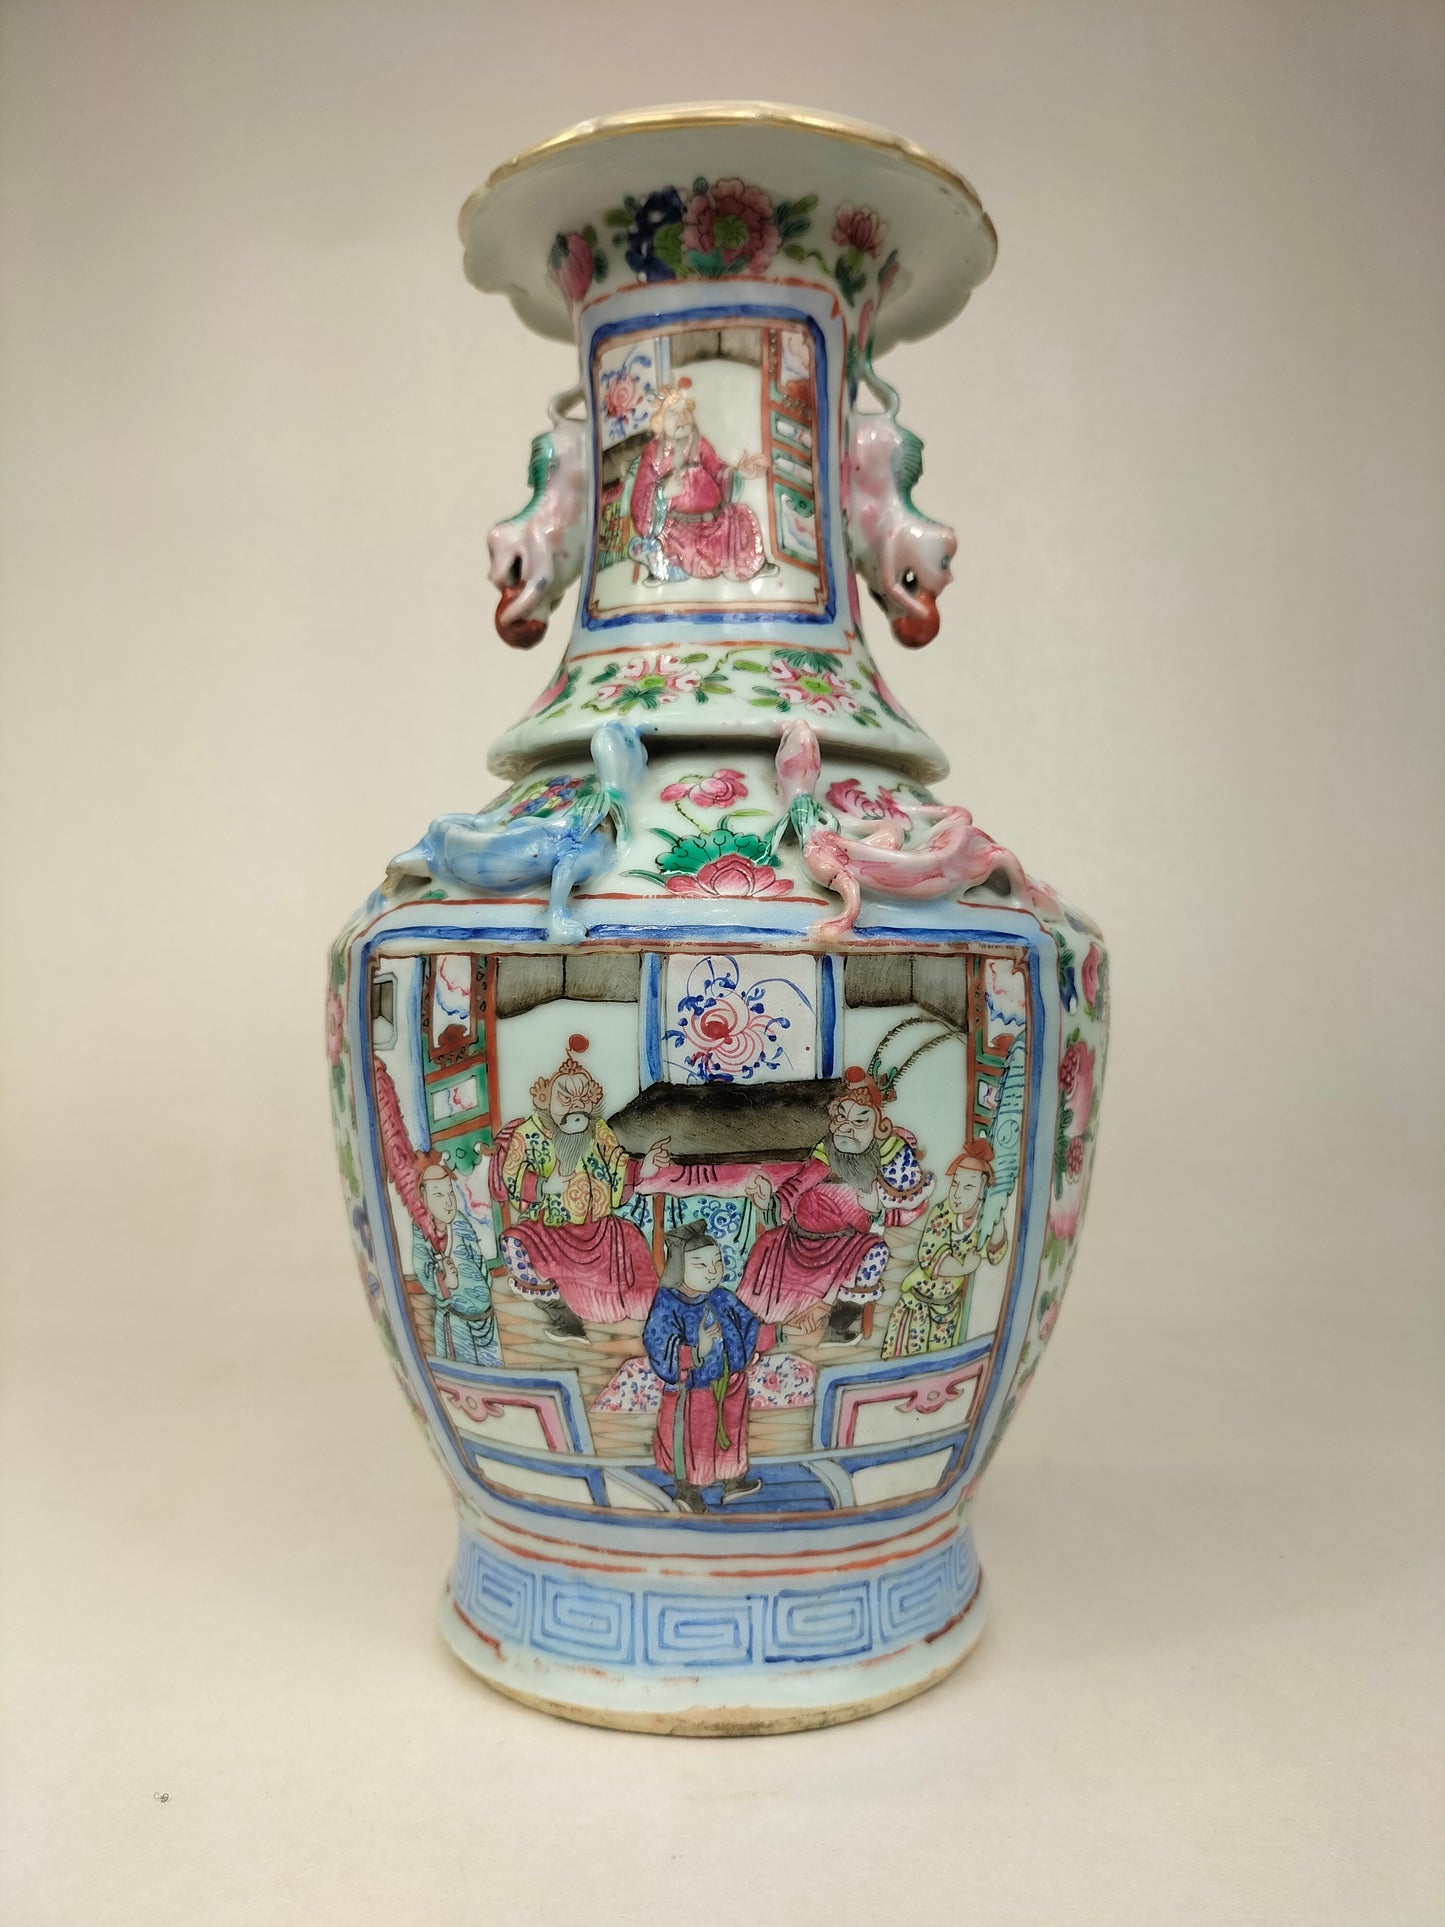 Antique Chinese canton vase decorated with an Imperial scene // Qing Dynasty - 19th century